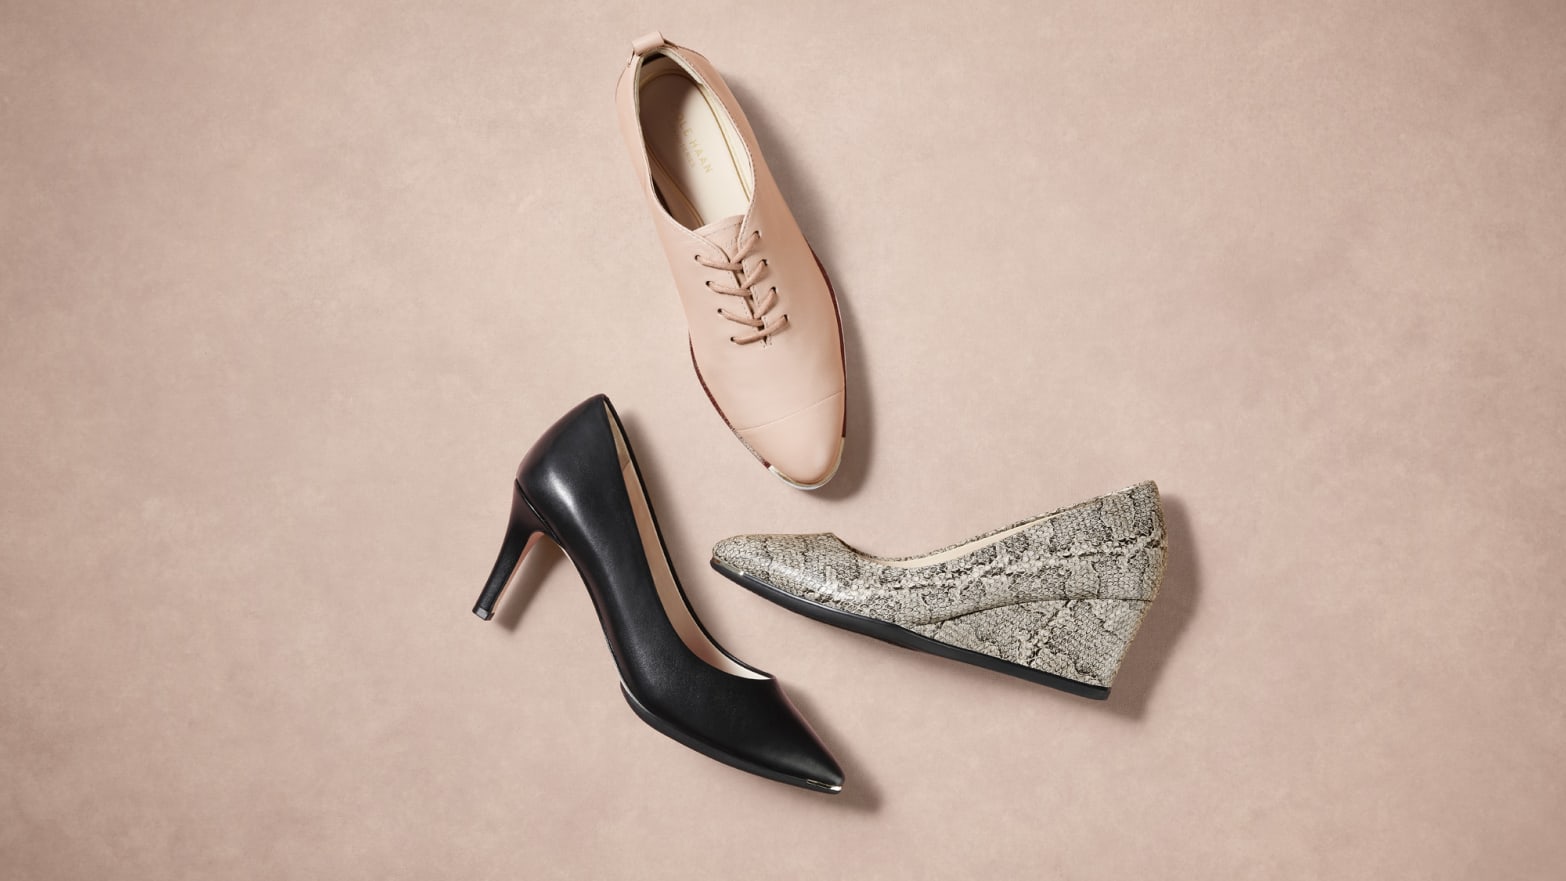 Cole Haan Launches A New Comfort-Focused Women's Line